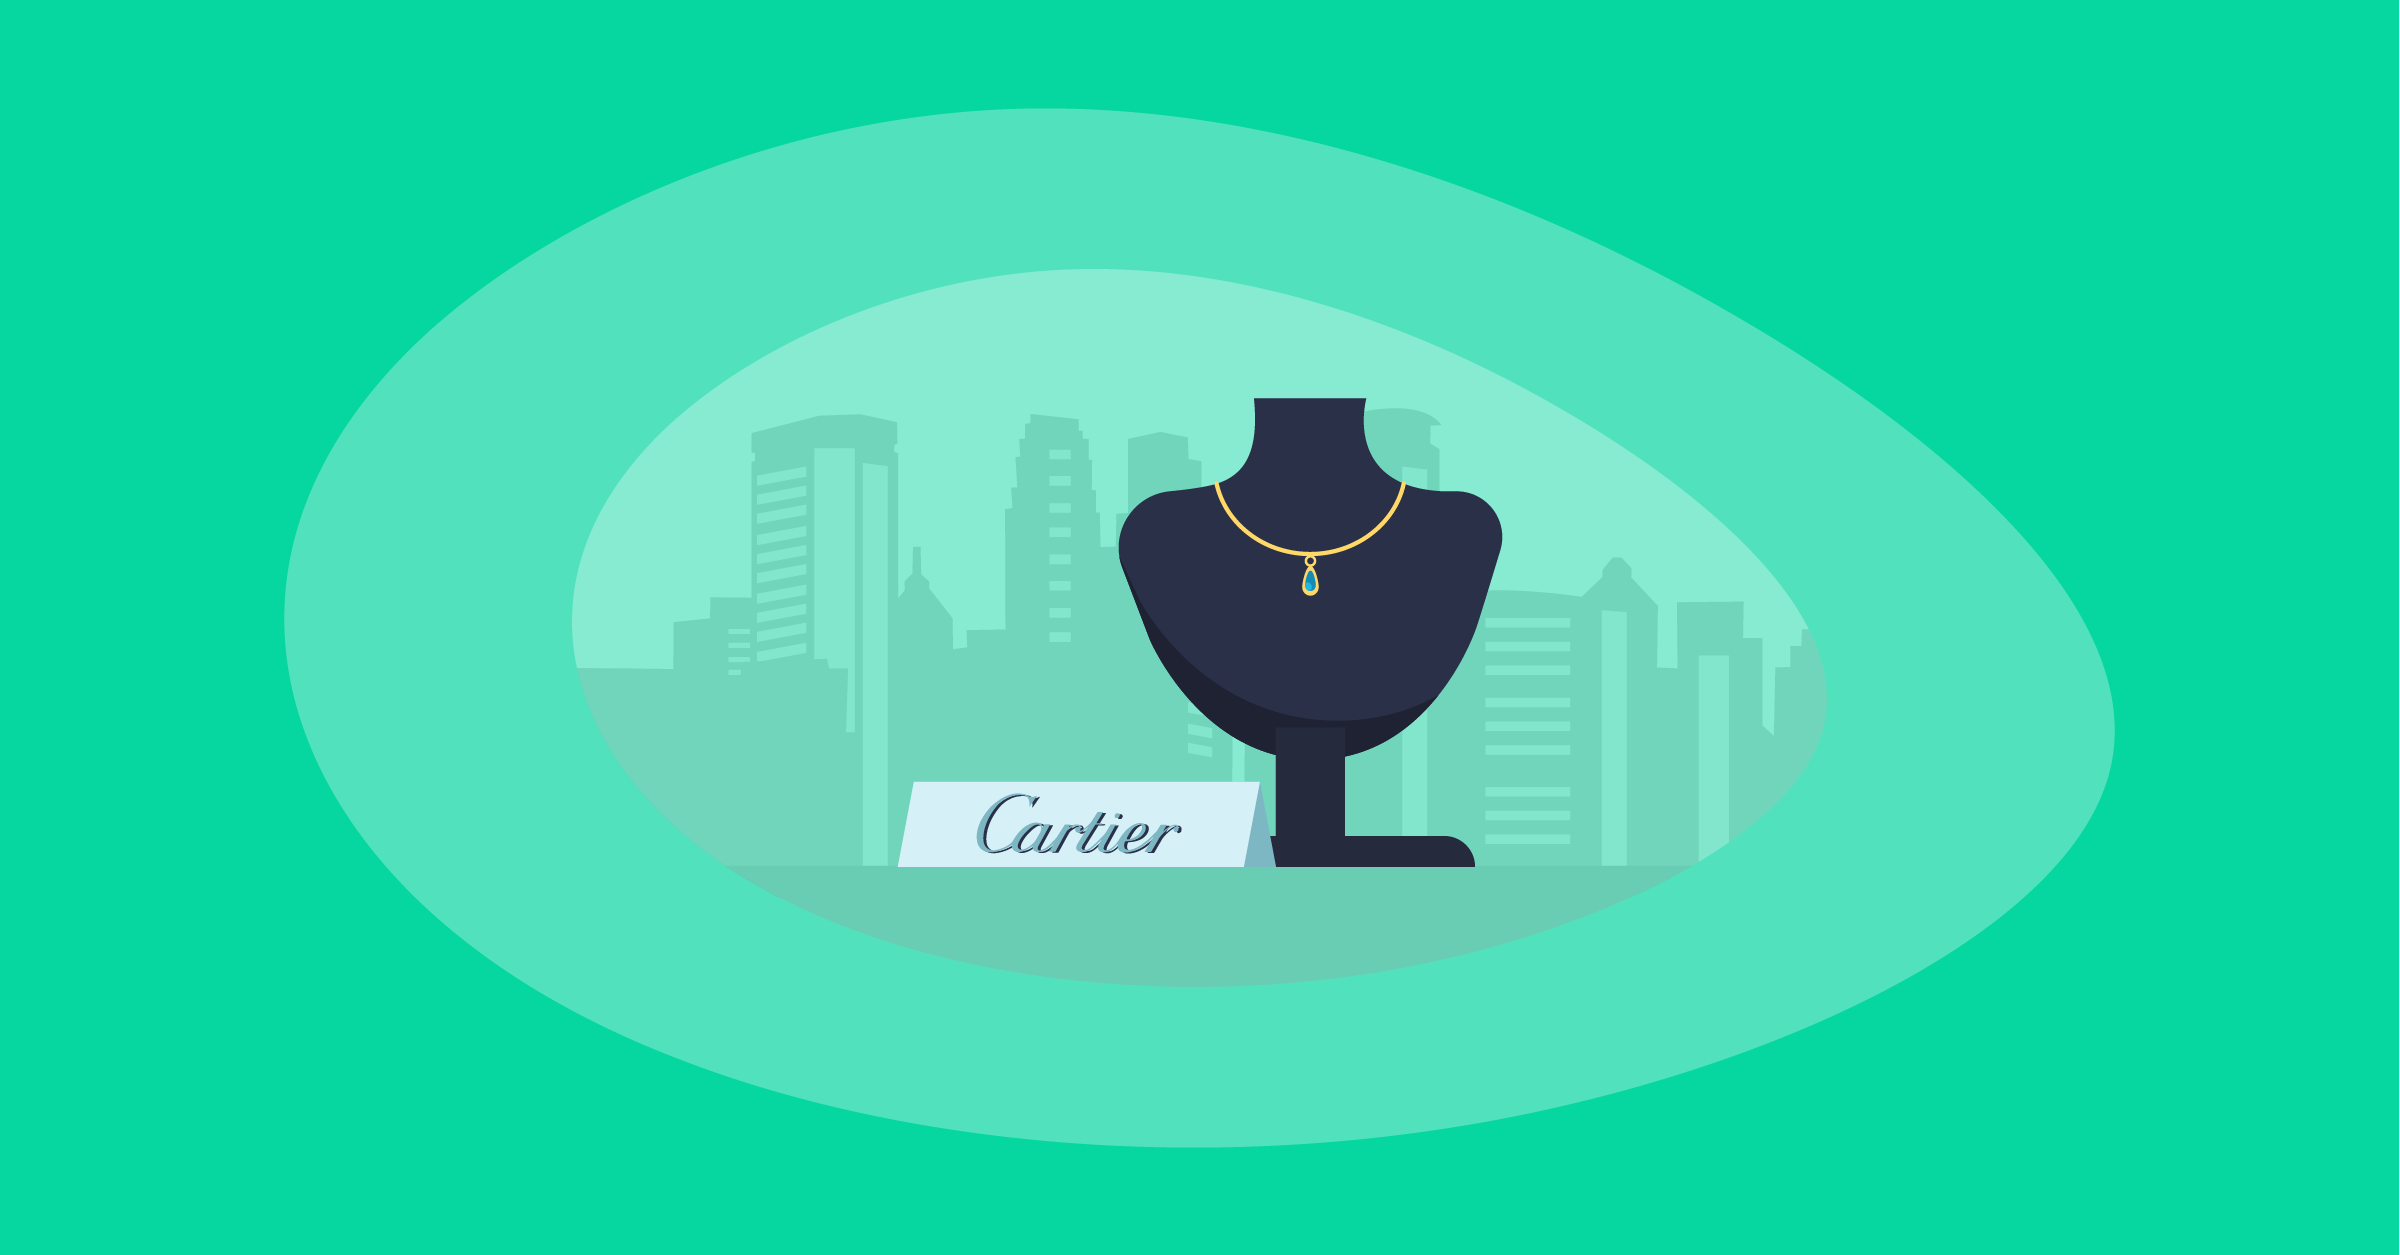 Illustration of a Cartier necklace